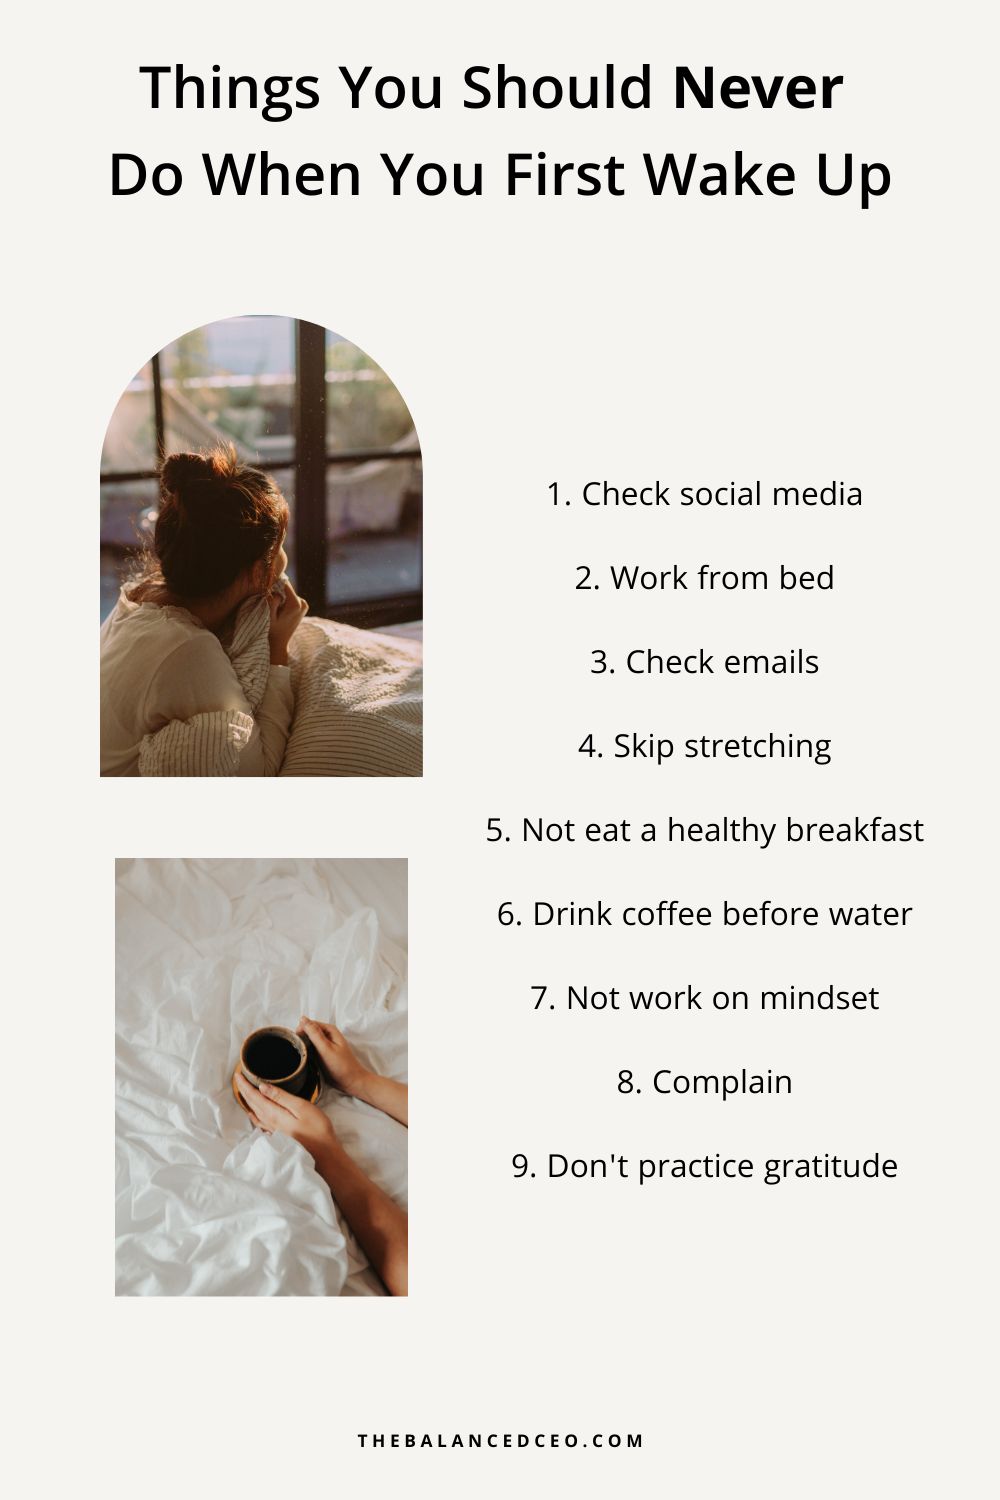 Things You Should Never Do in the Morning